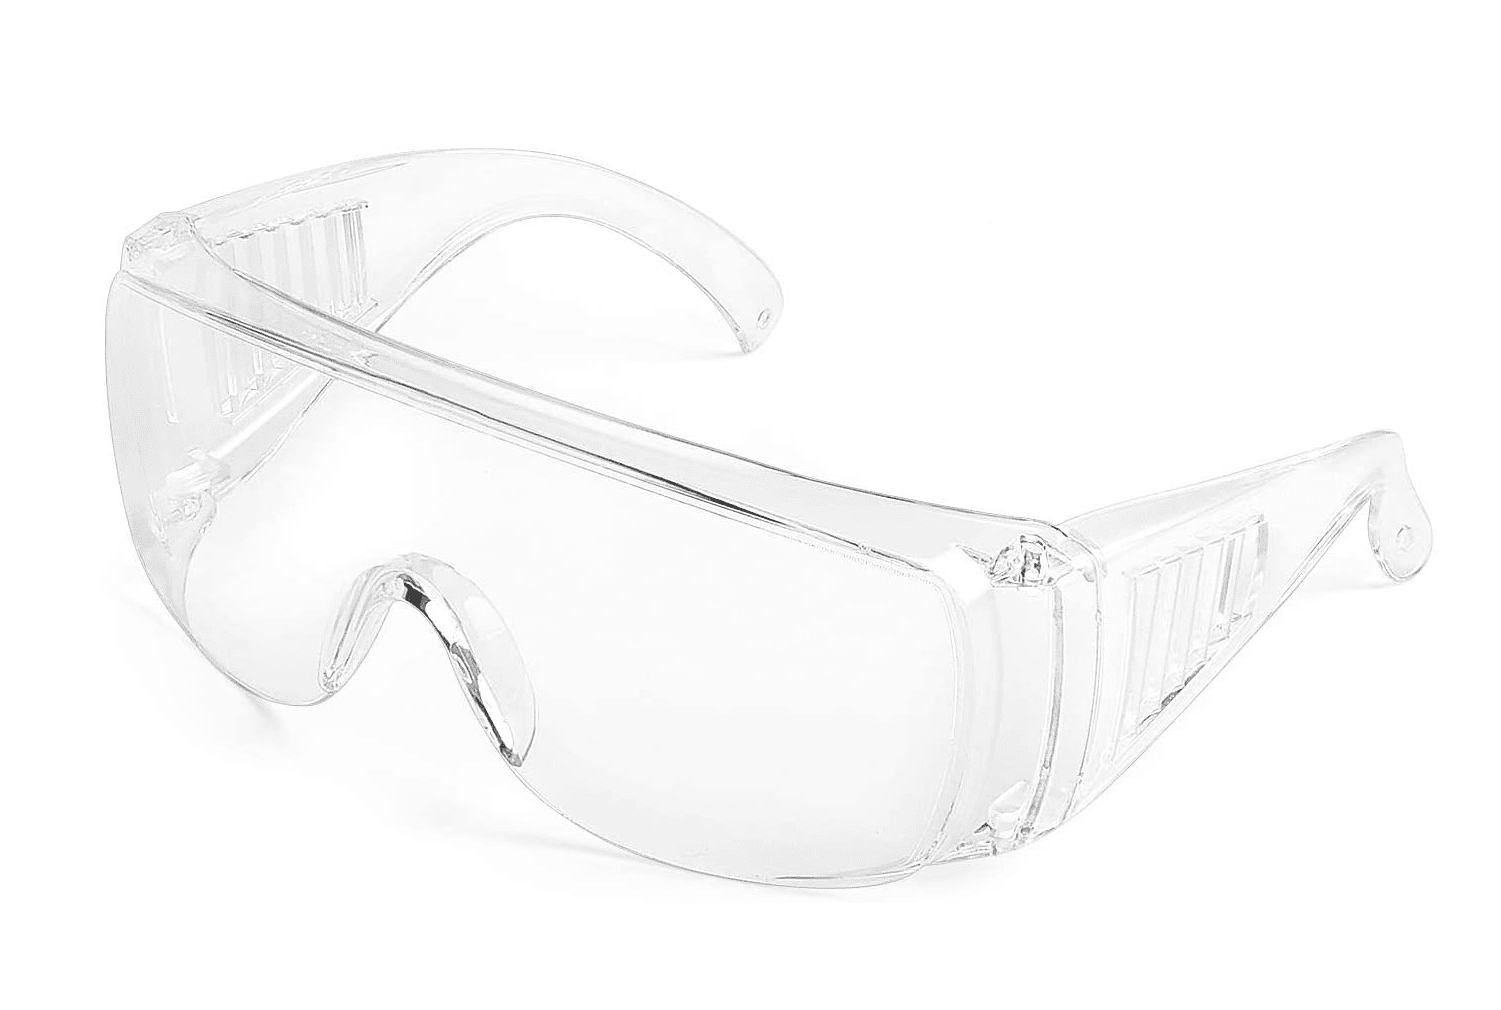 Details about   Safety Protective Eyes Goggles Over Glasses Lens For Lab Work US STOCK 